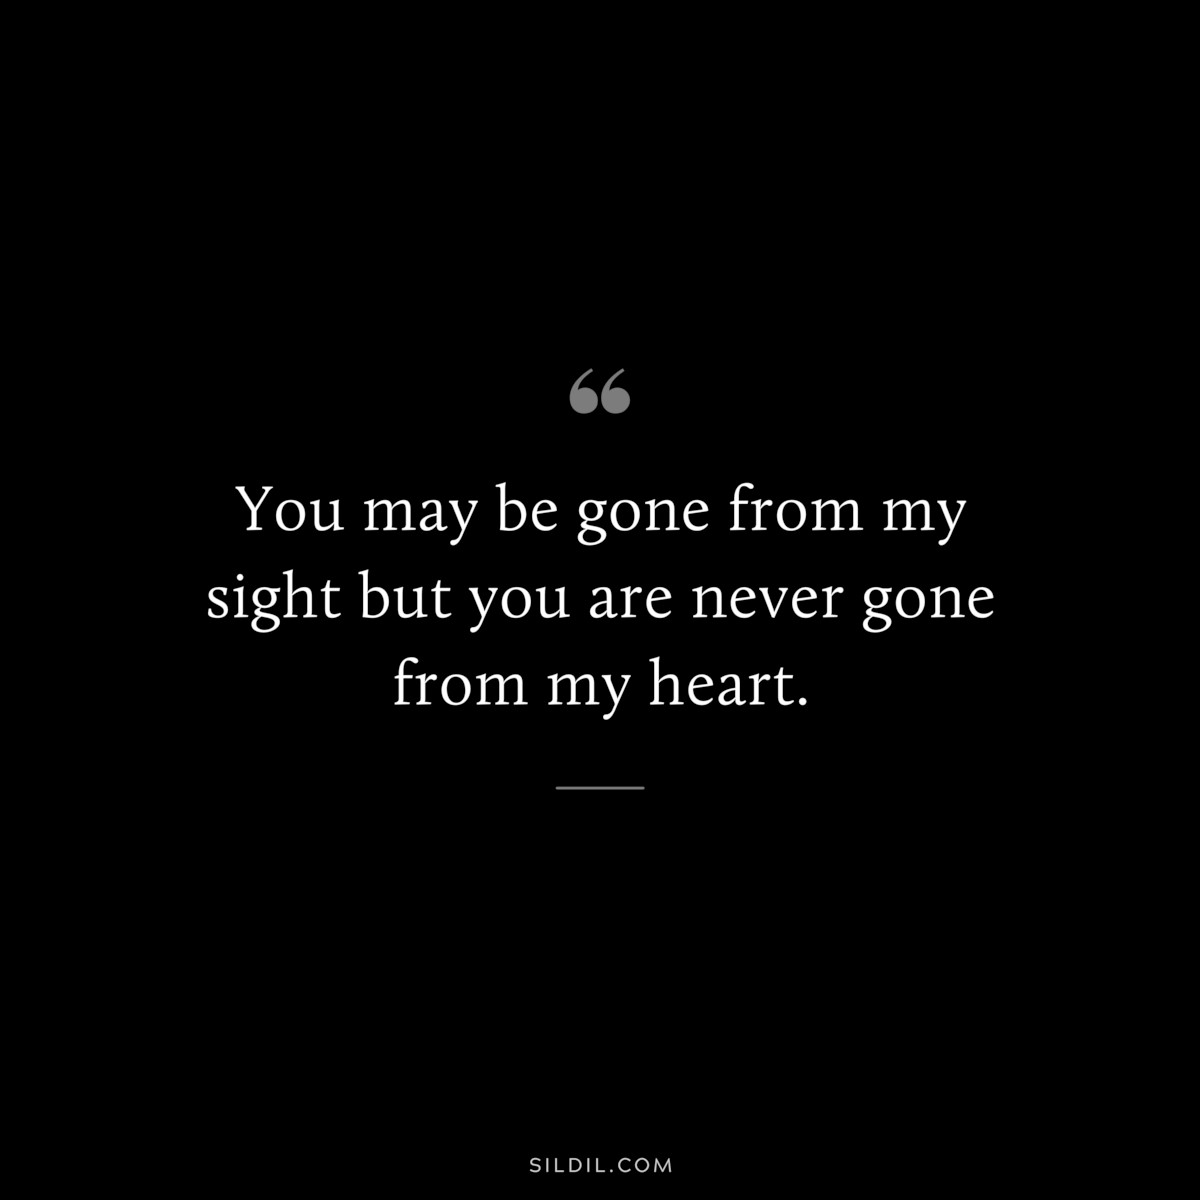 You may be gone from my sight but you are never gone from my heart.